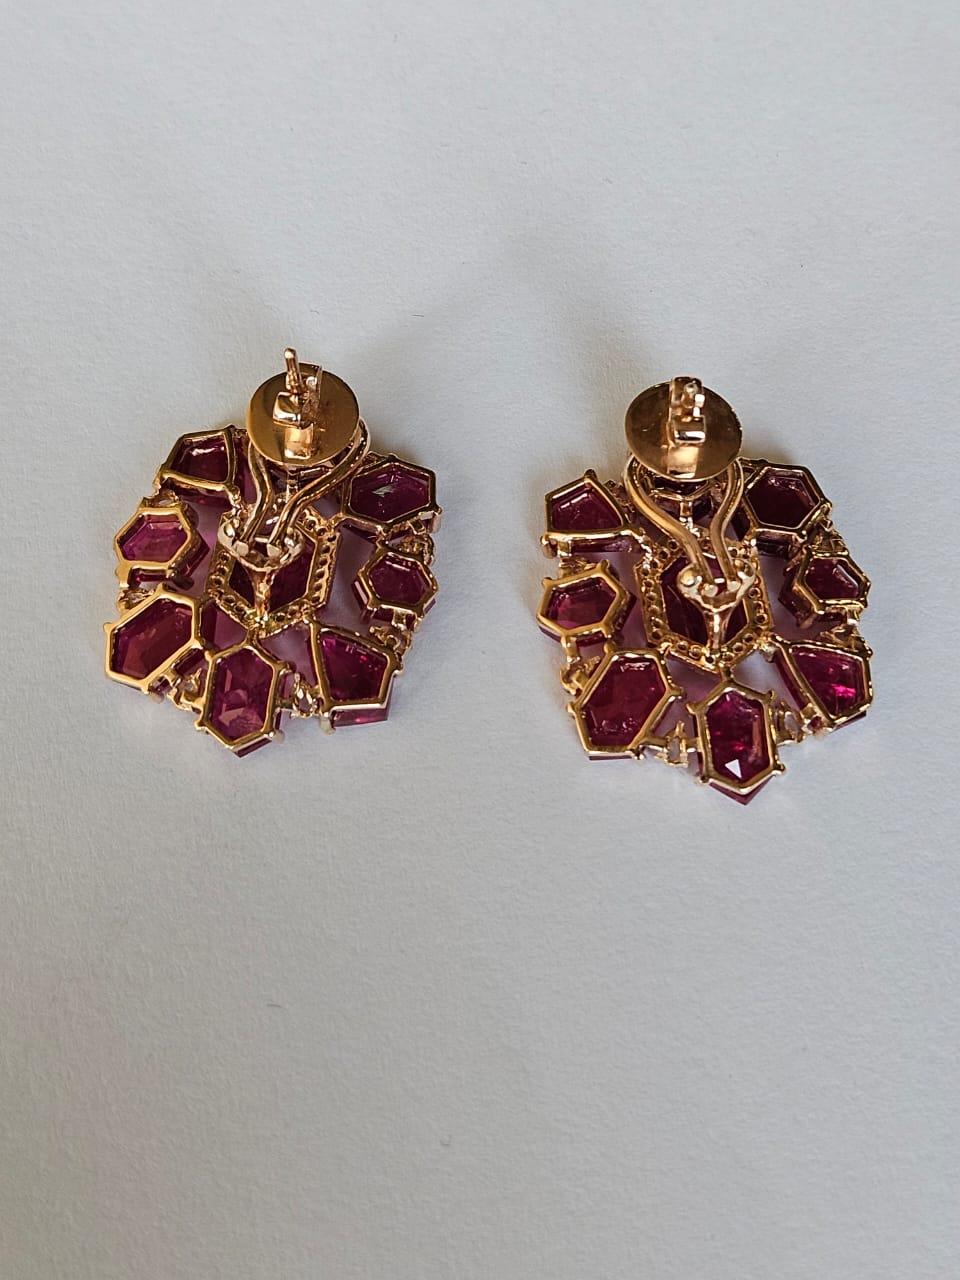 Modern Set in 18K Gold, 21.78 carats, natural Mozambique Ruby & Diamonds Stud Earrings